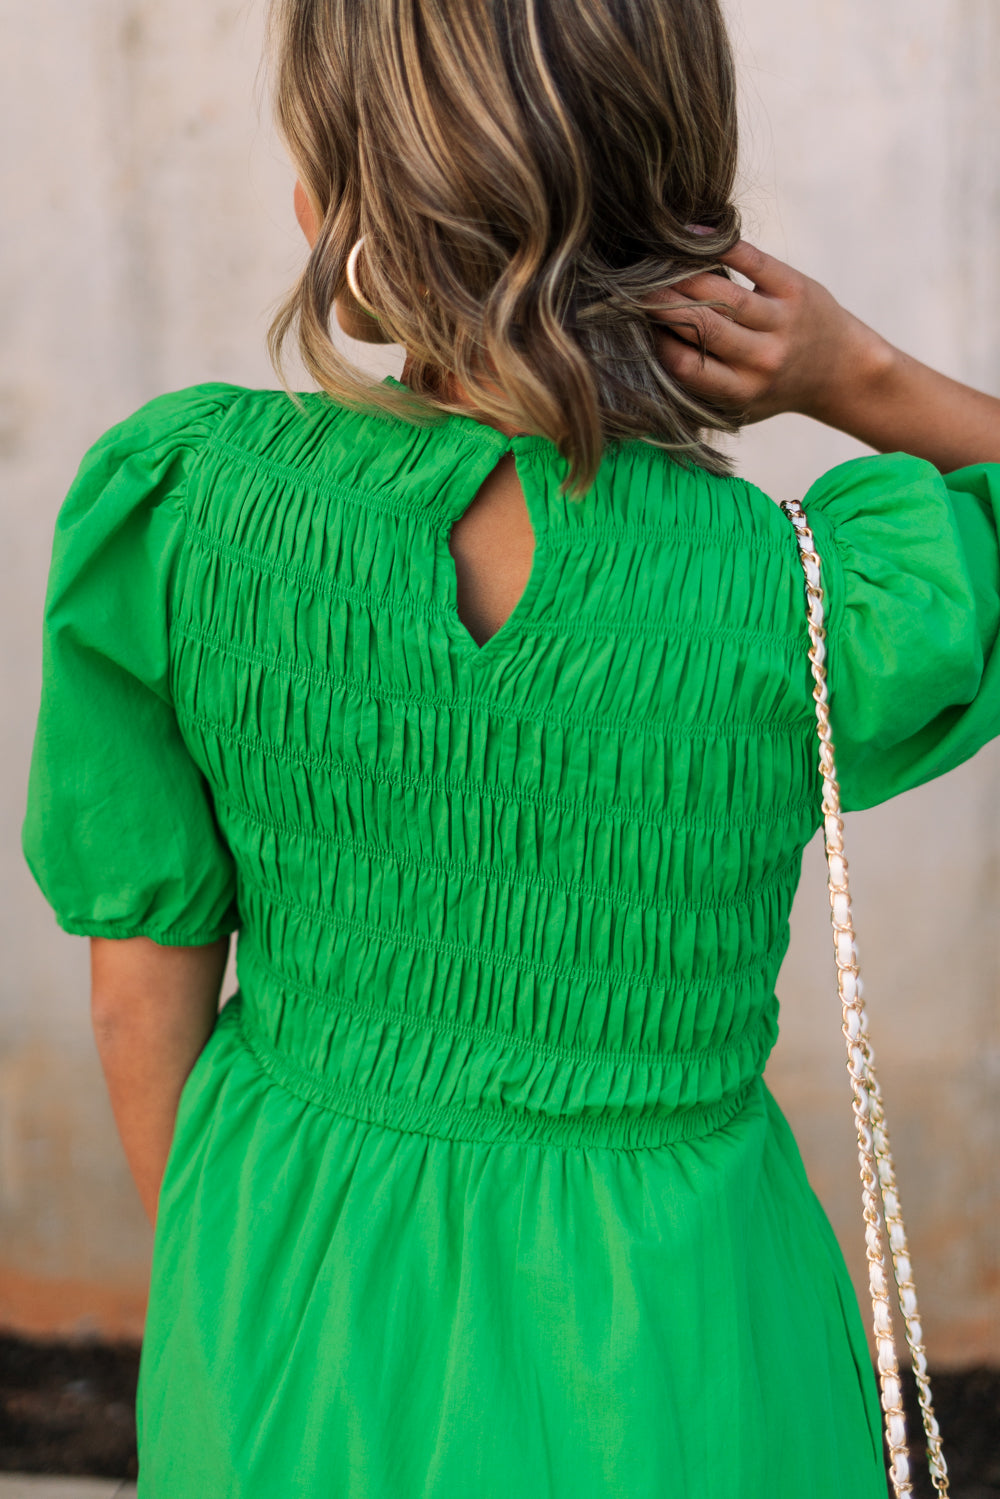 Upper body back view of female model wearing the Lea Green Puff Sleeve Mini Dress that has kelly green fabric, a smocked upper with high neck, short puff sleeves, and mini length. Model is holding coffee and has purse on shoulder.